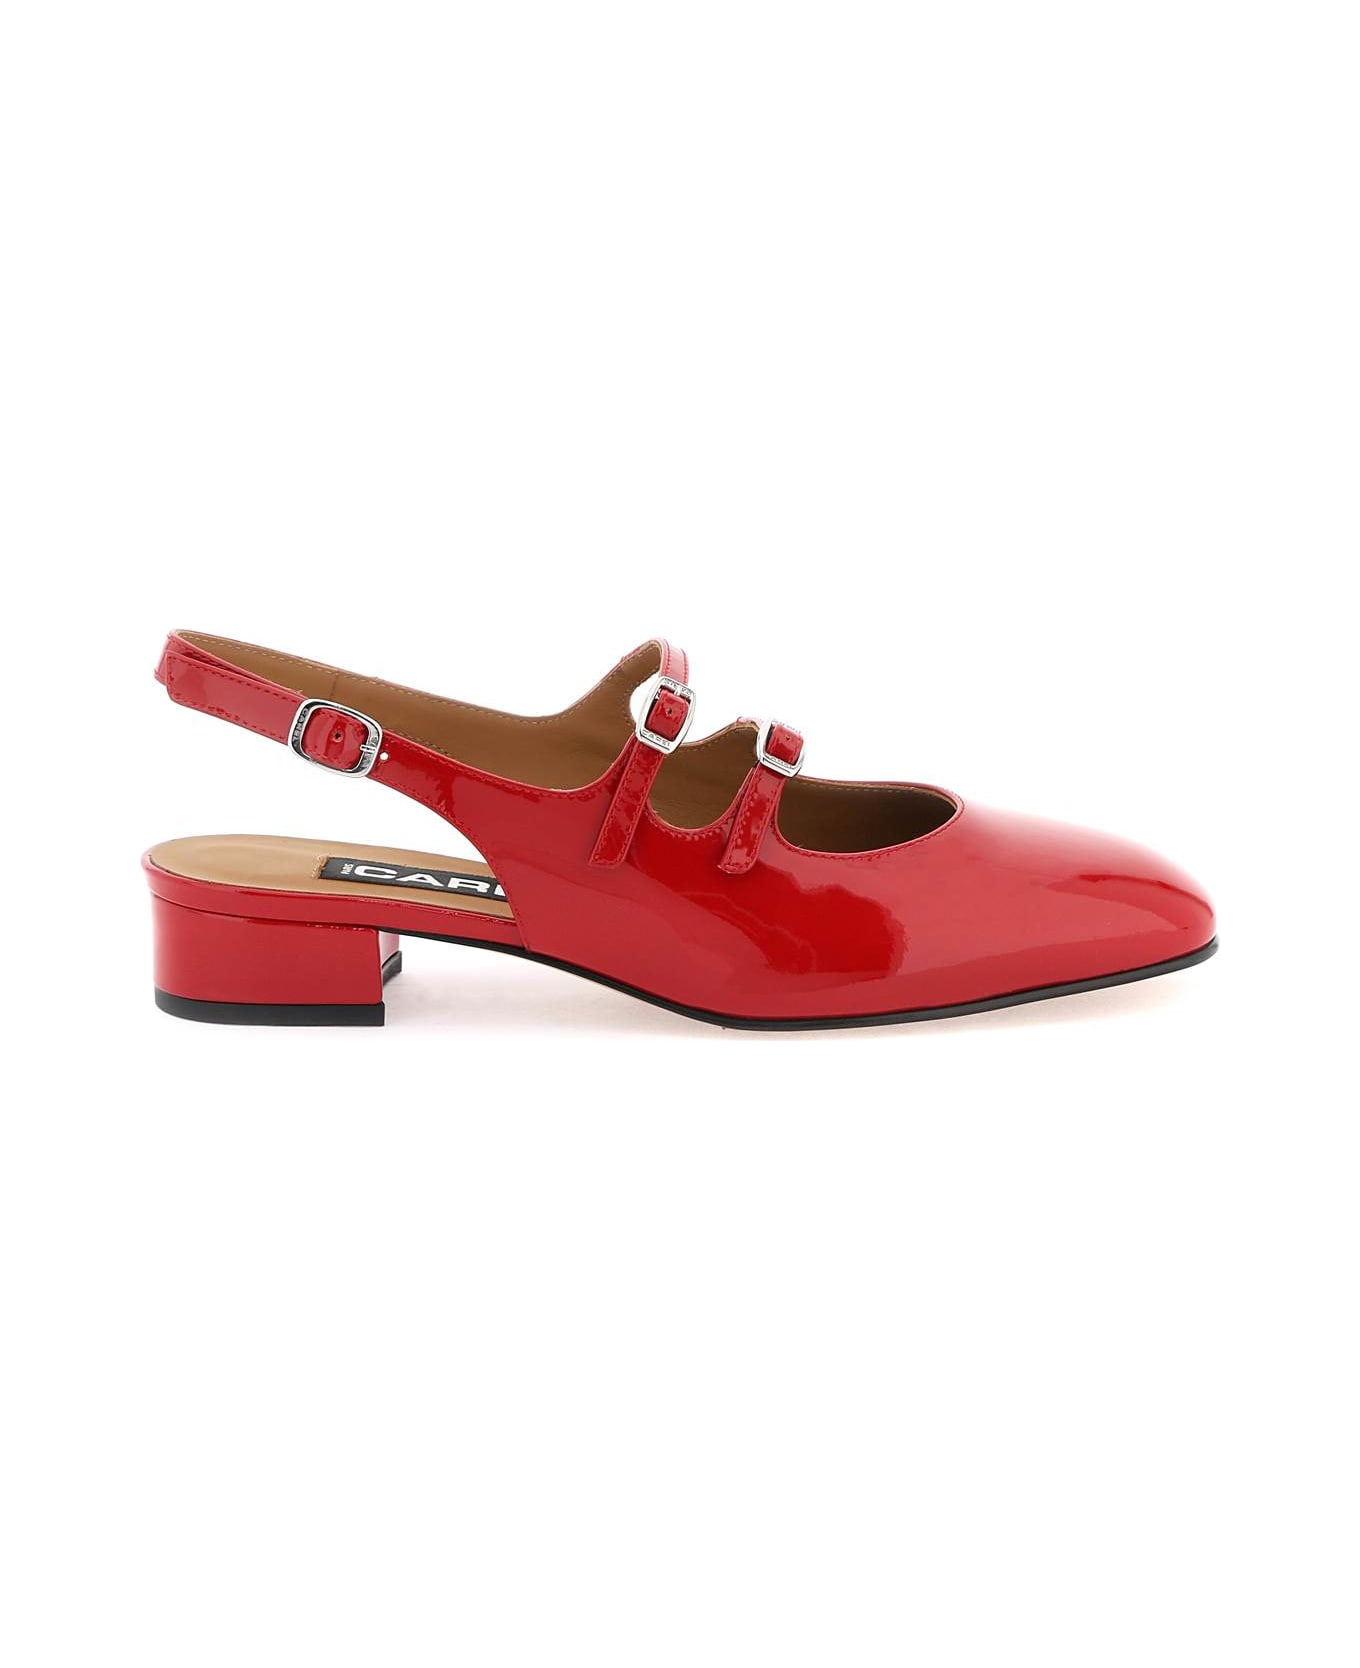 Carel Patent Leather Pêche Slingback Mary Jane - ROUGE (Red)